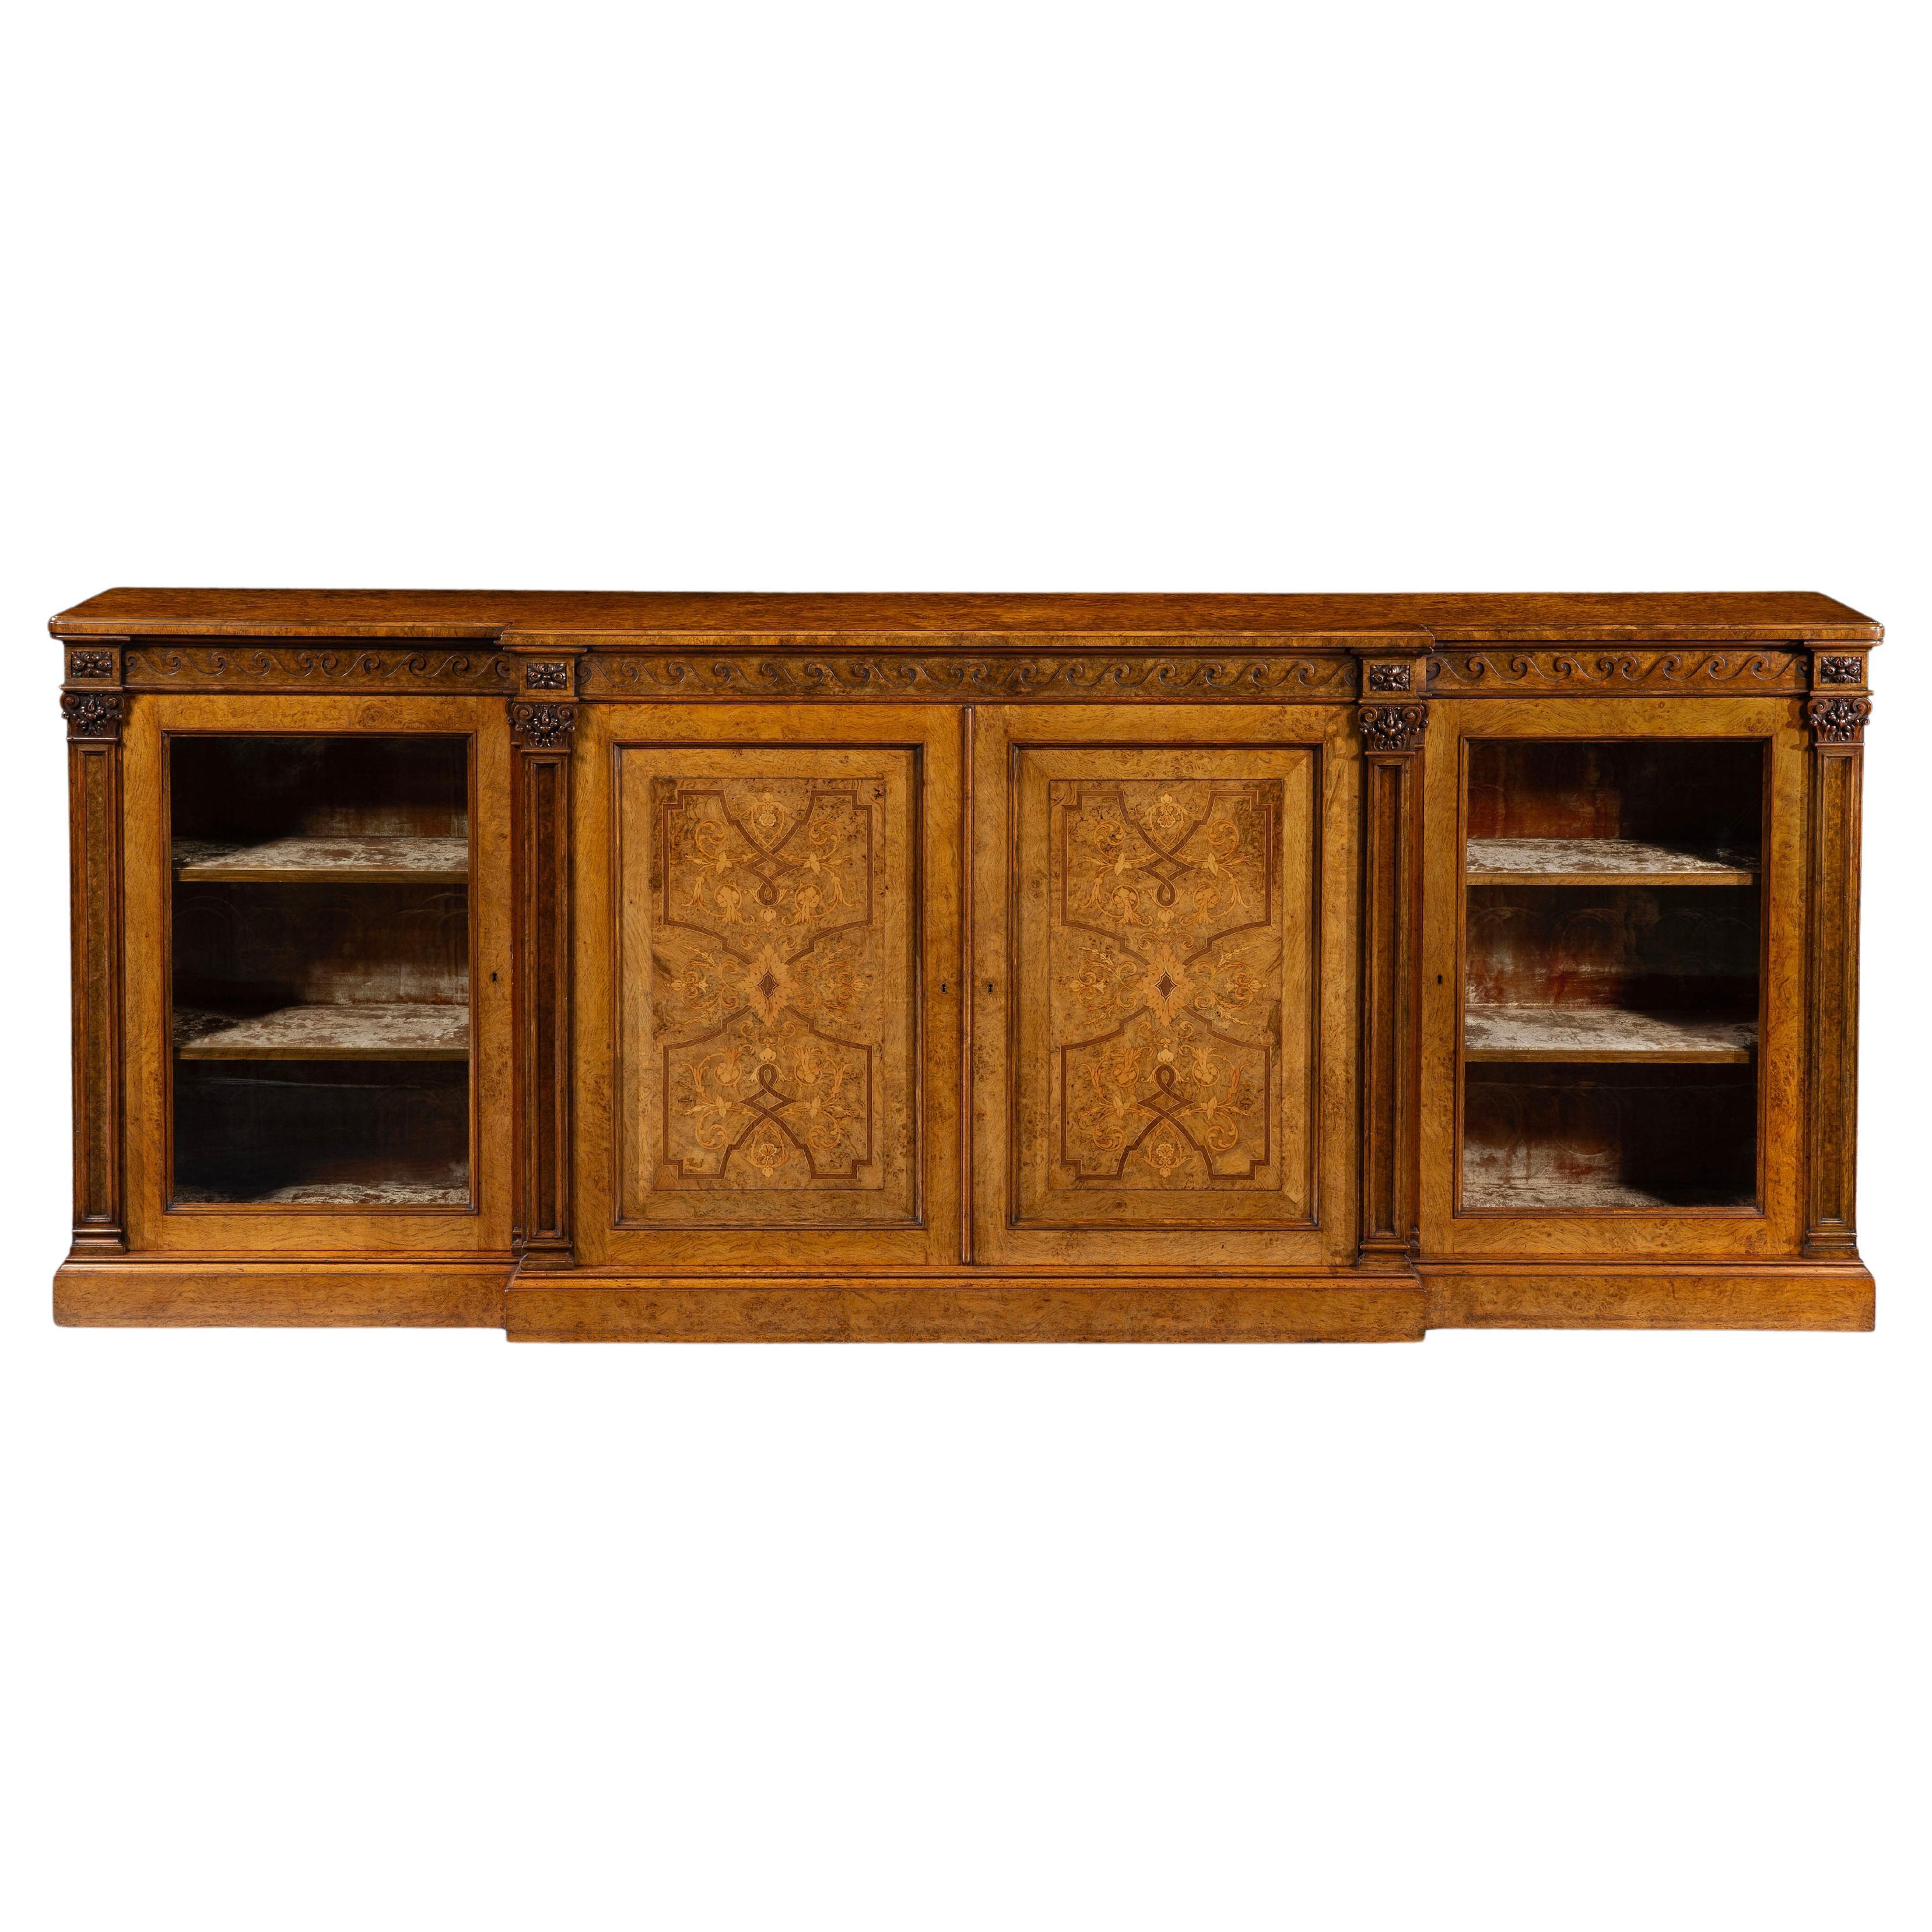 Rare & Large Pollard Oak Bookcase by Holland & Sons of London